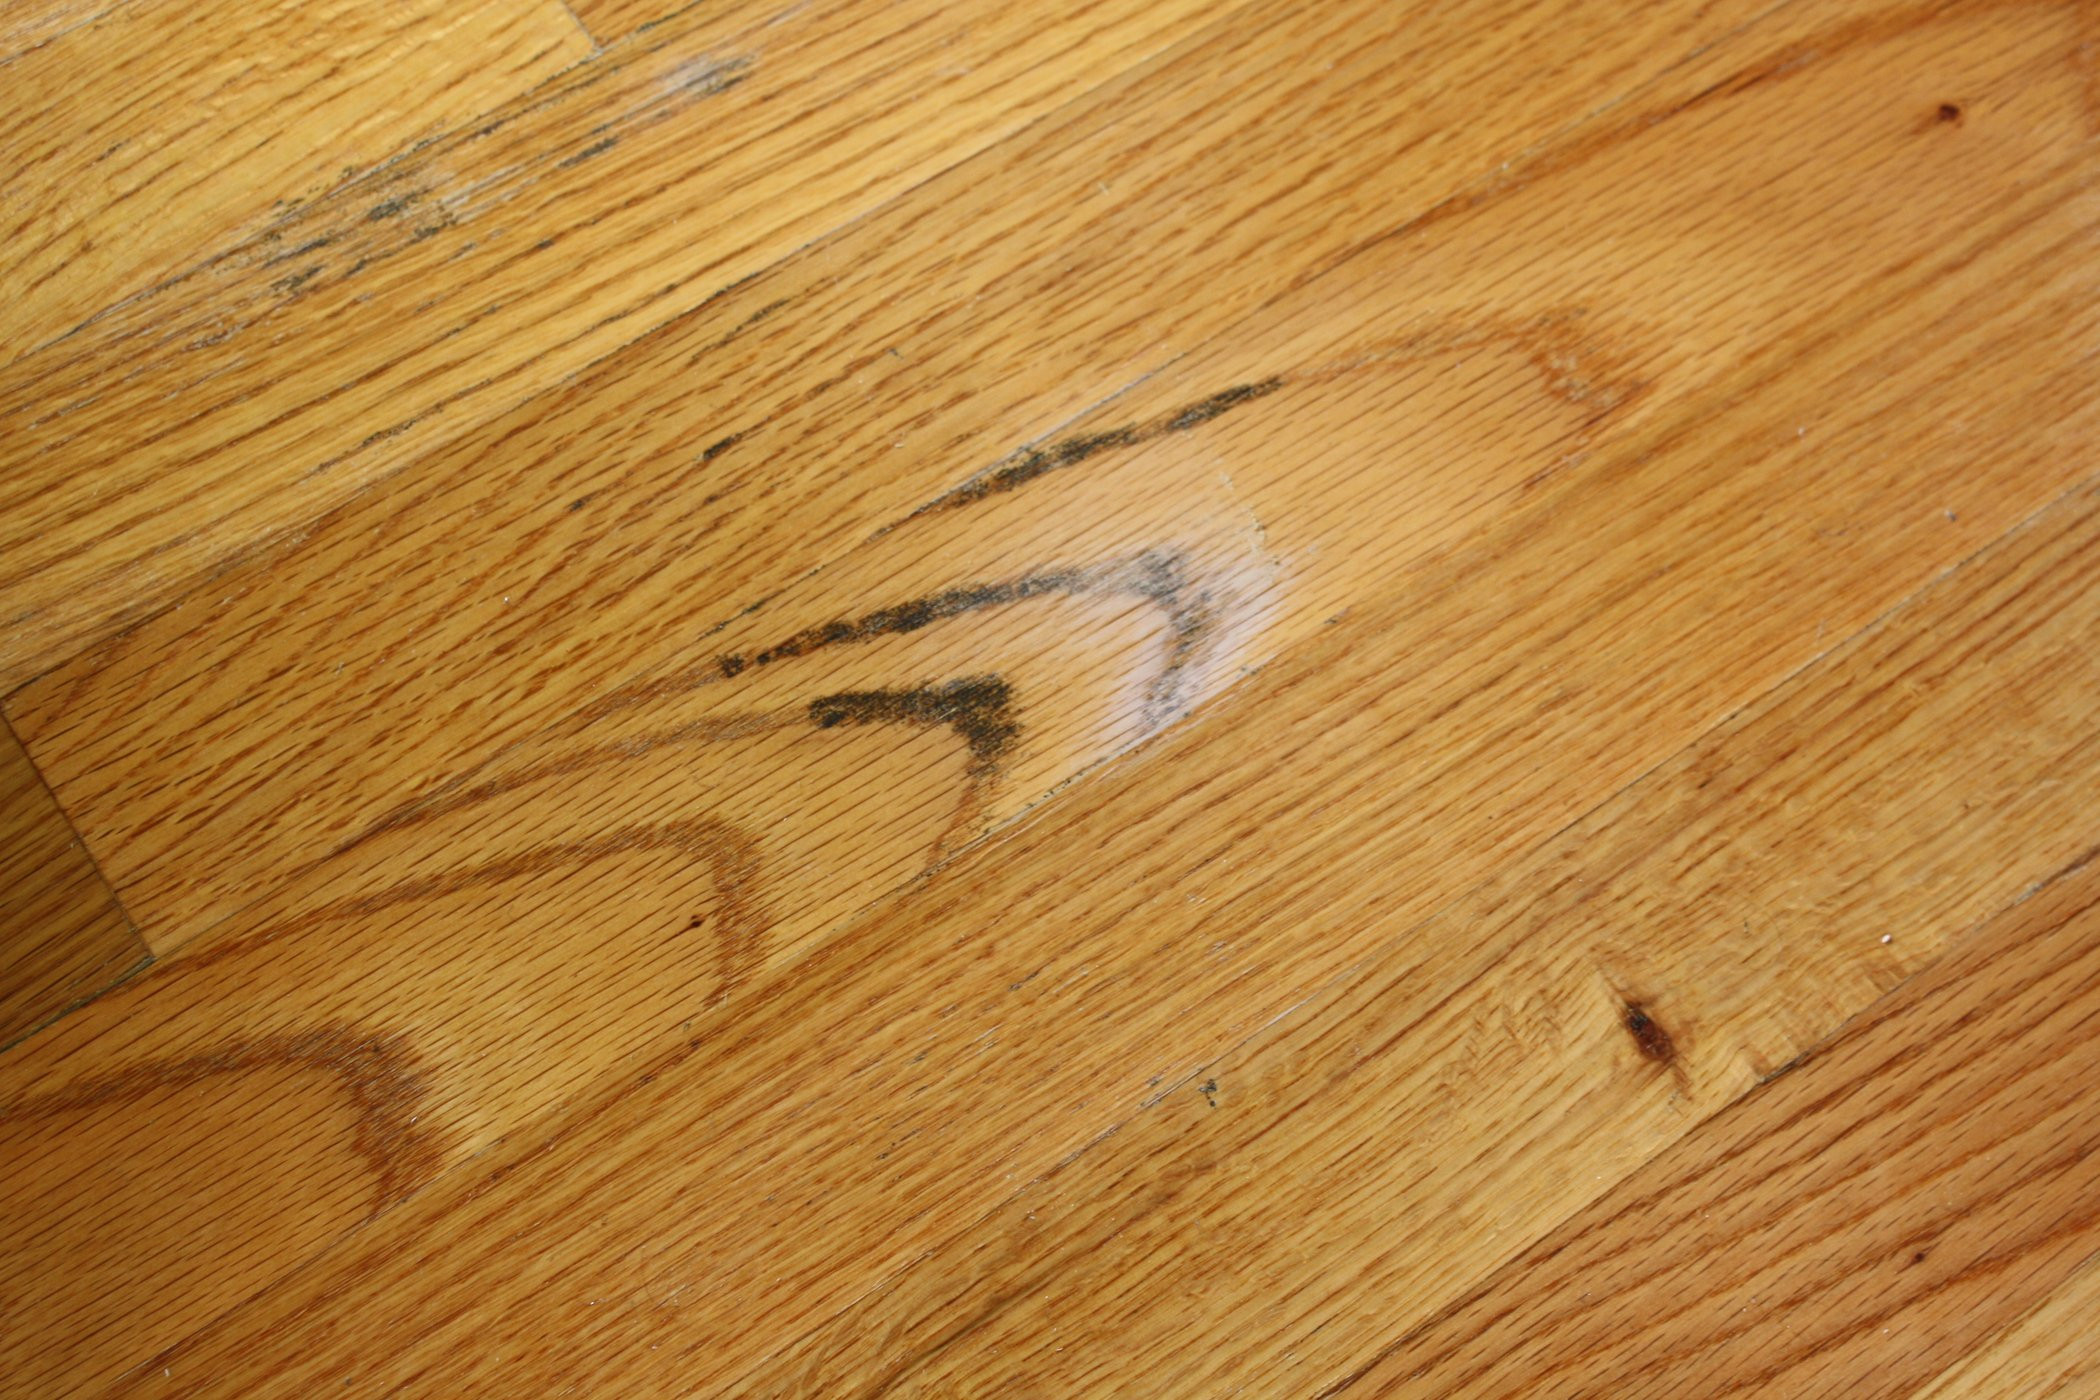 hardwood floor cost vs laminate of how to clean mold from a wood floor 4 steps within fylcmqyg7dyp6ds